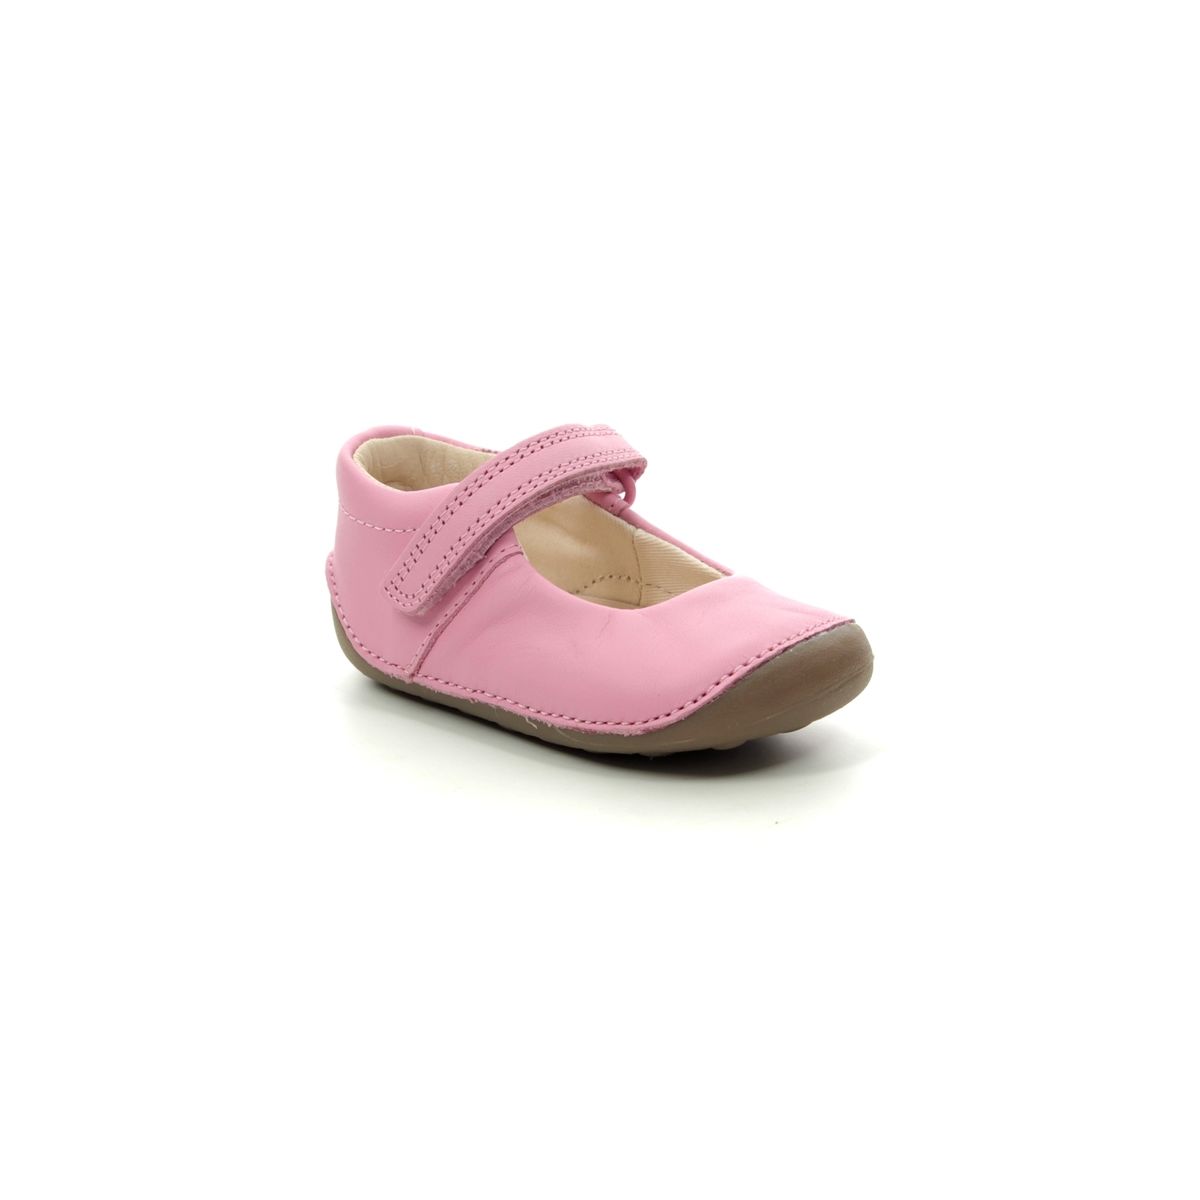 Clarks Tiny Mist T F Fit Pink Leather girls first and baby shoes